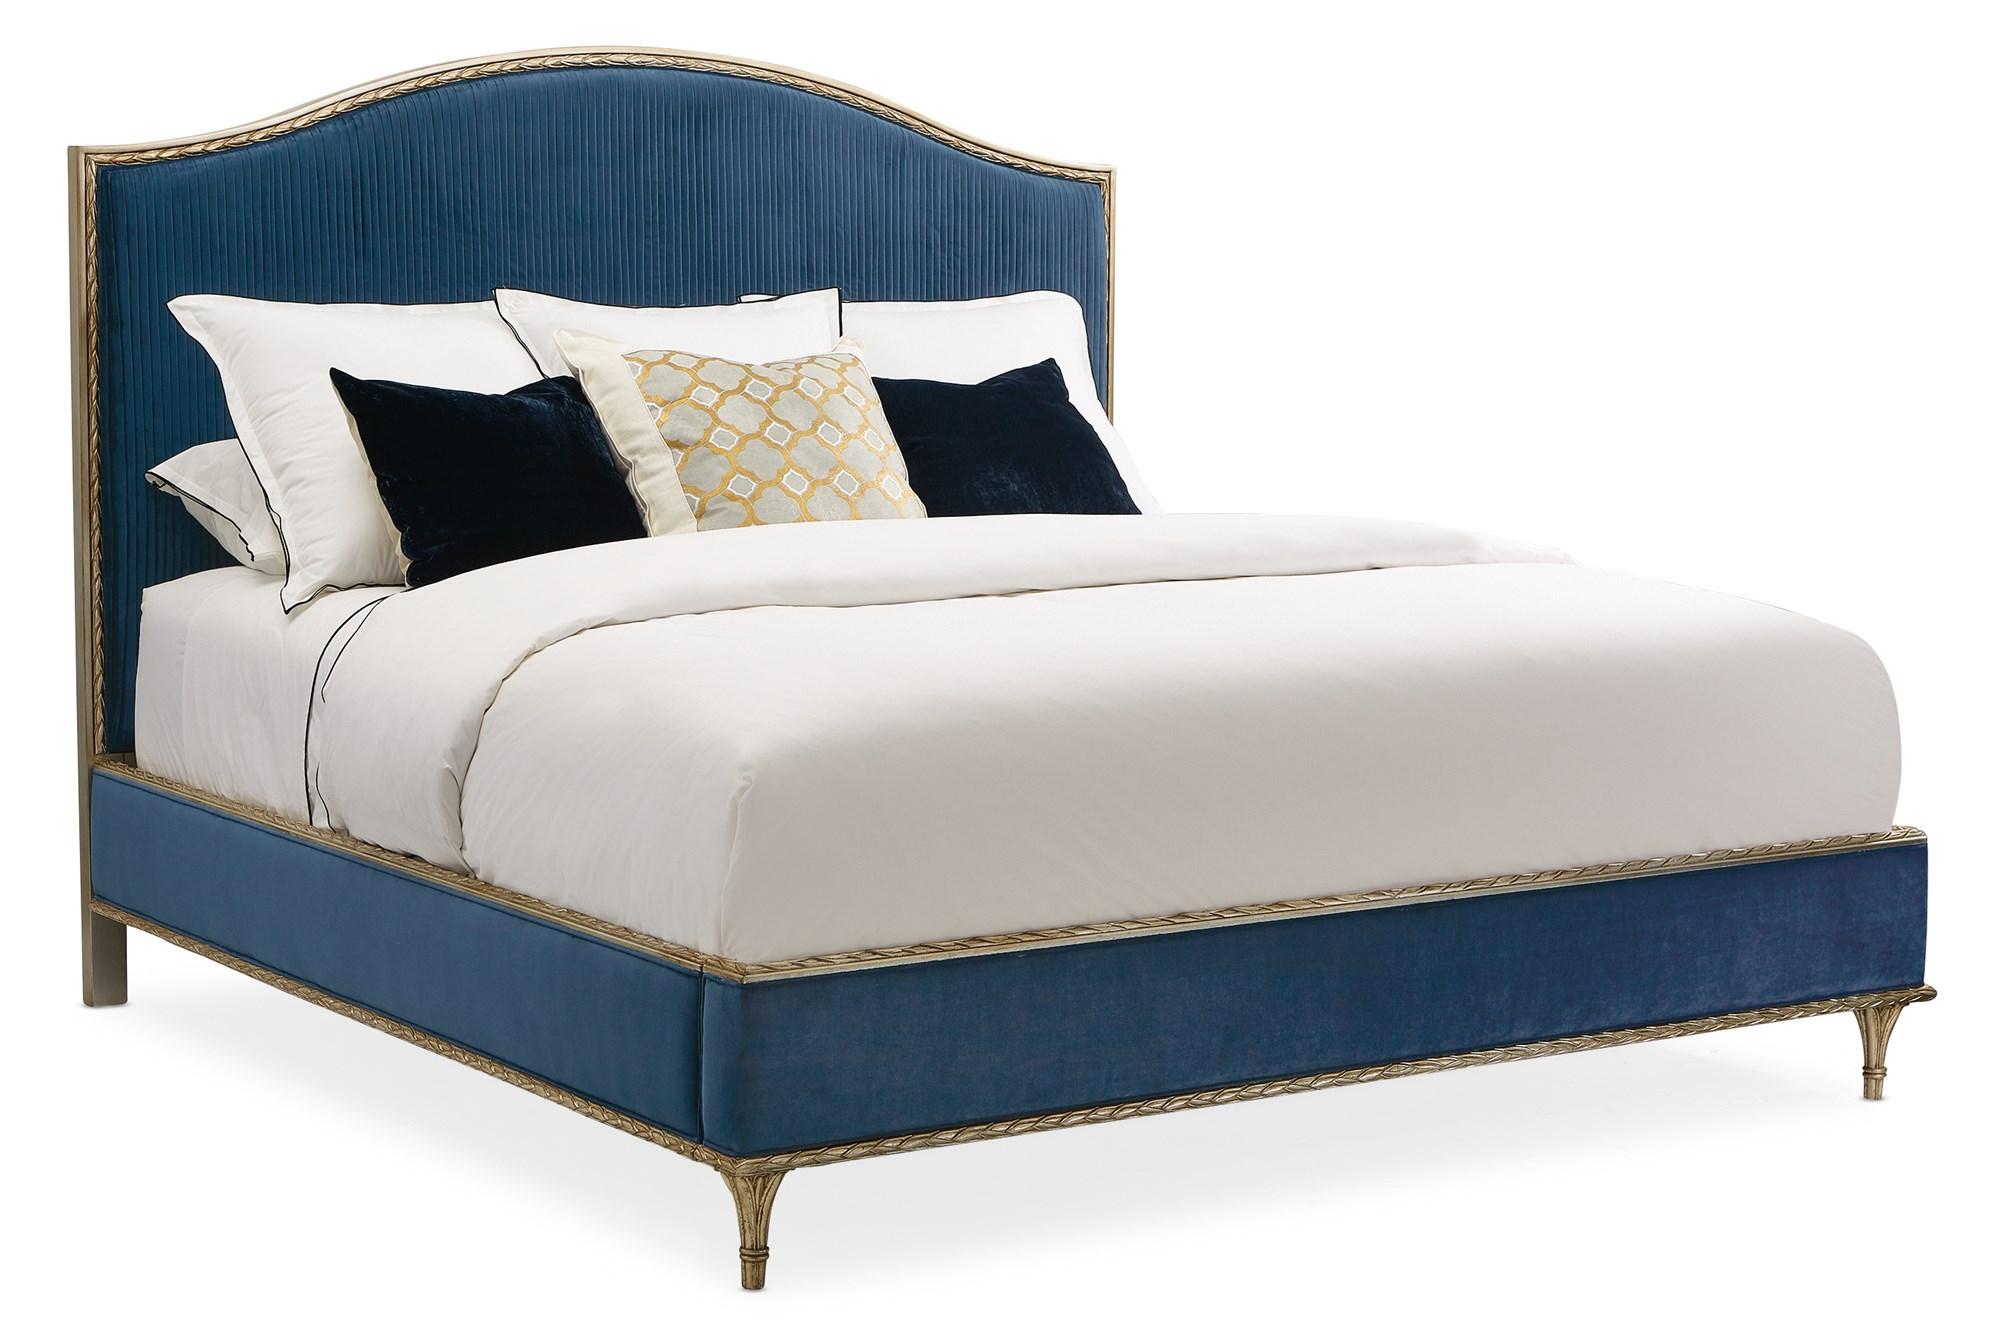 Traditional Platform Bed FONTAINEBLEAU C063-419-102 in Gold, Blue Fabric